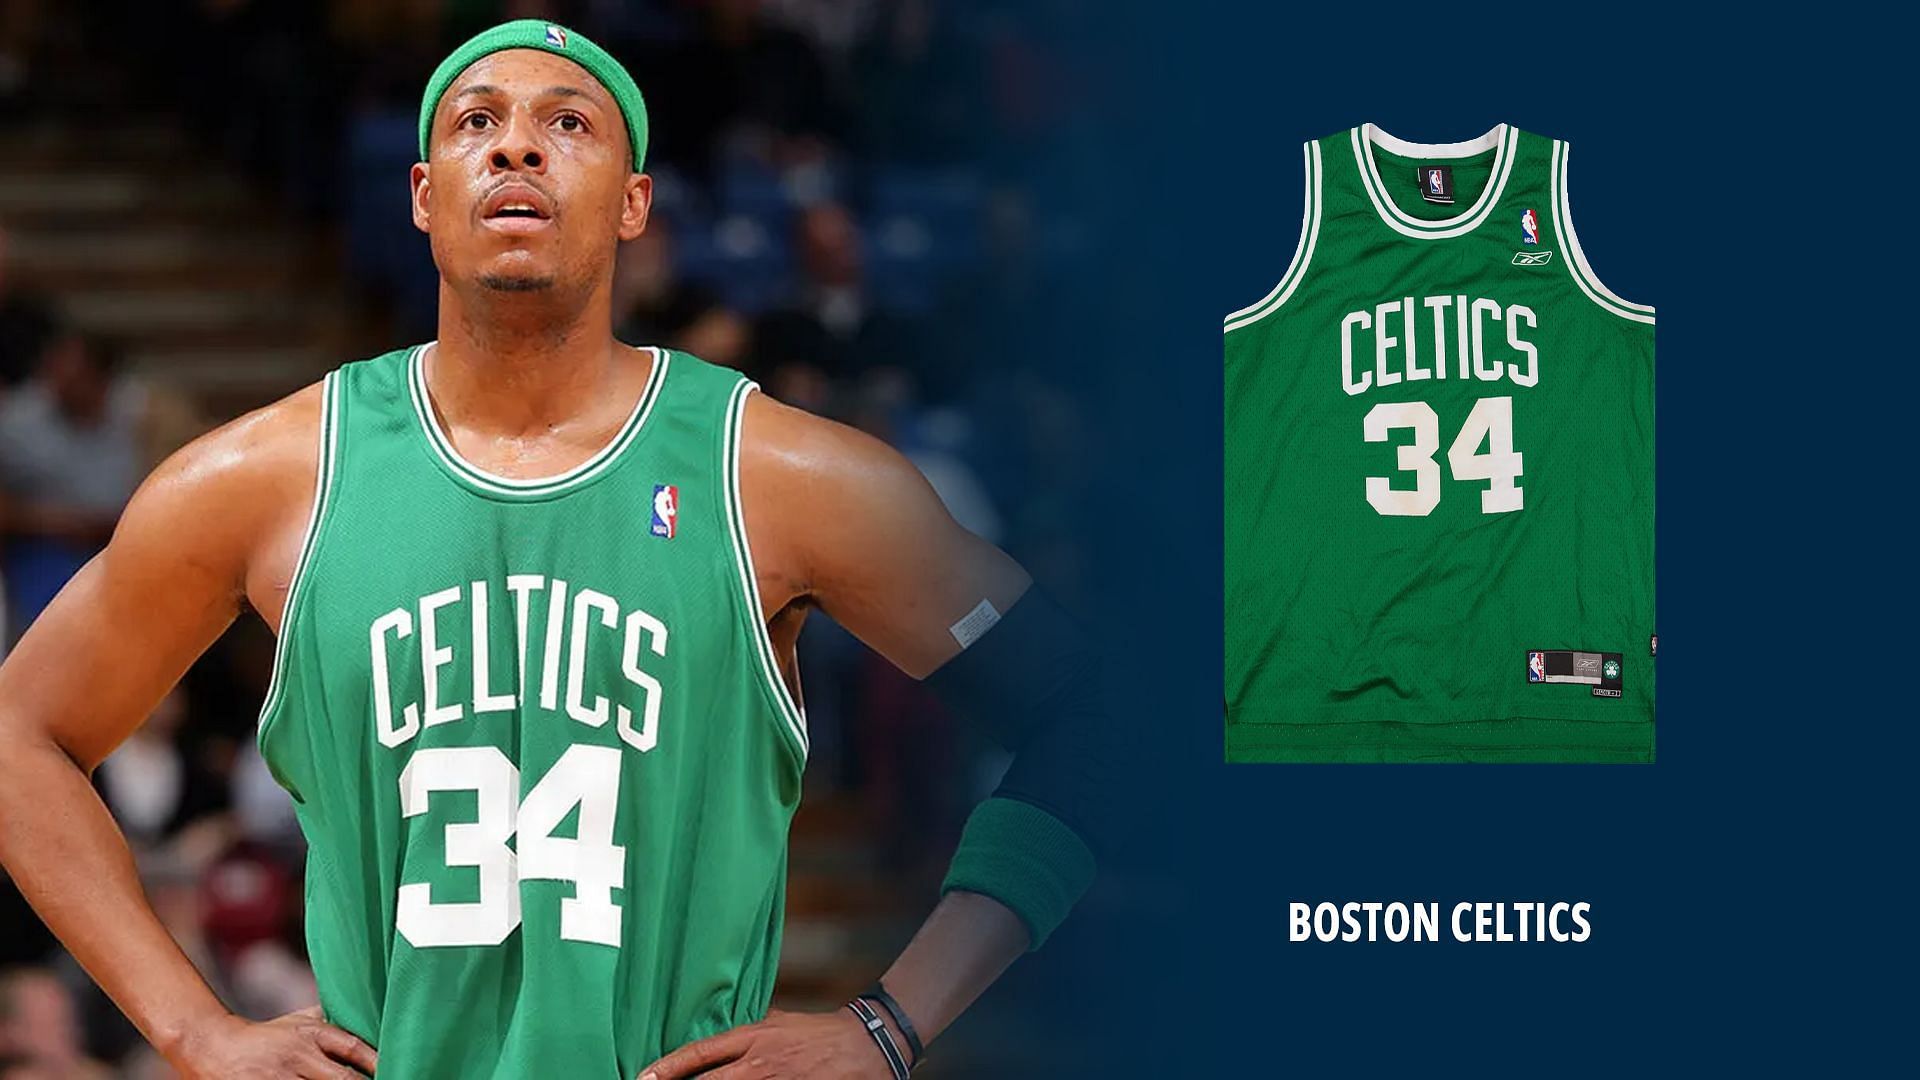 25 Most Iconic NBA Jerseys: Which Teams Have the Best Looks?